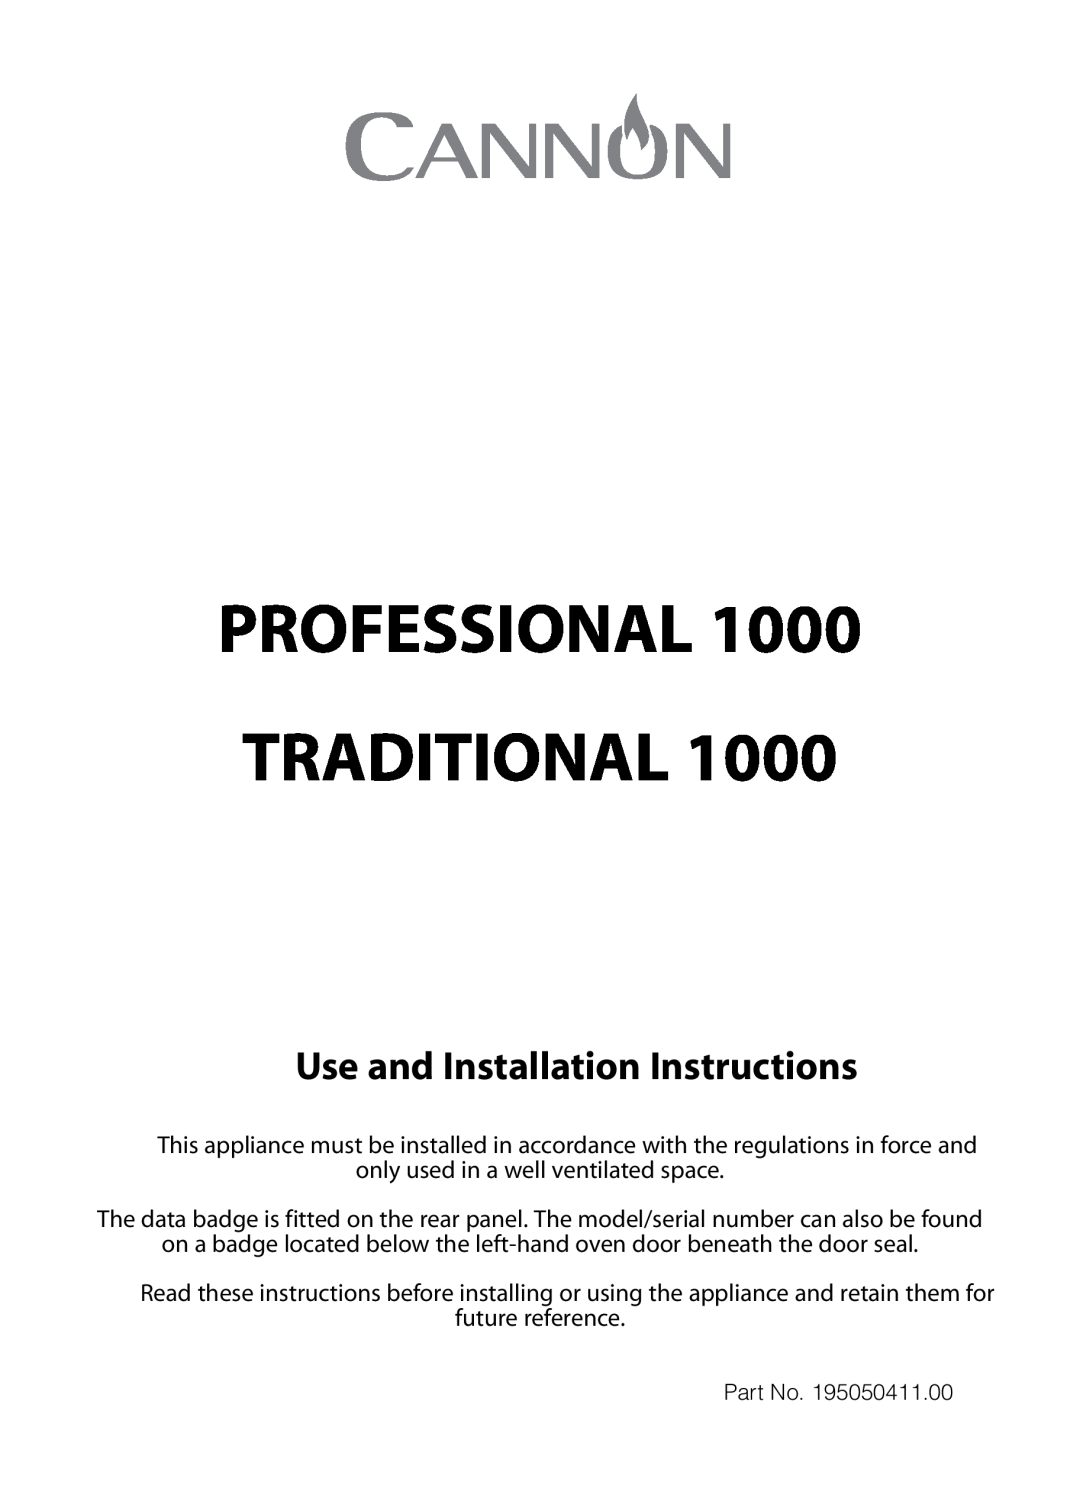 Cannon 10850G, 10855G, 10856G installation instructions Use and Installation Instructions, Professional Traditional 